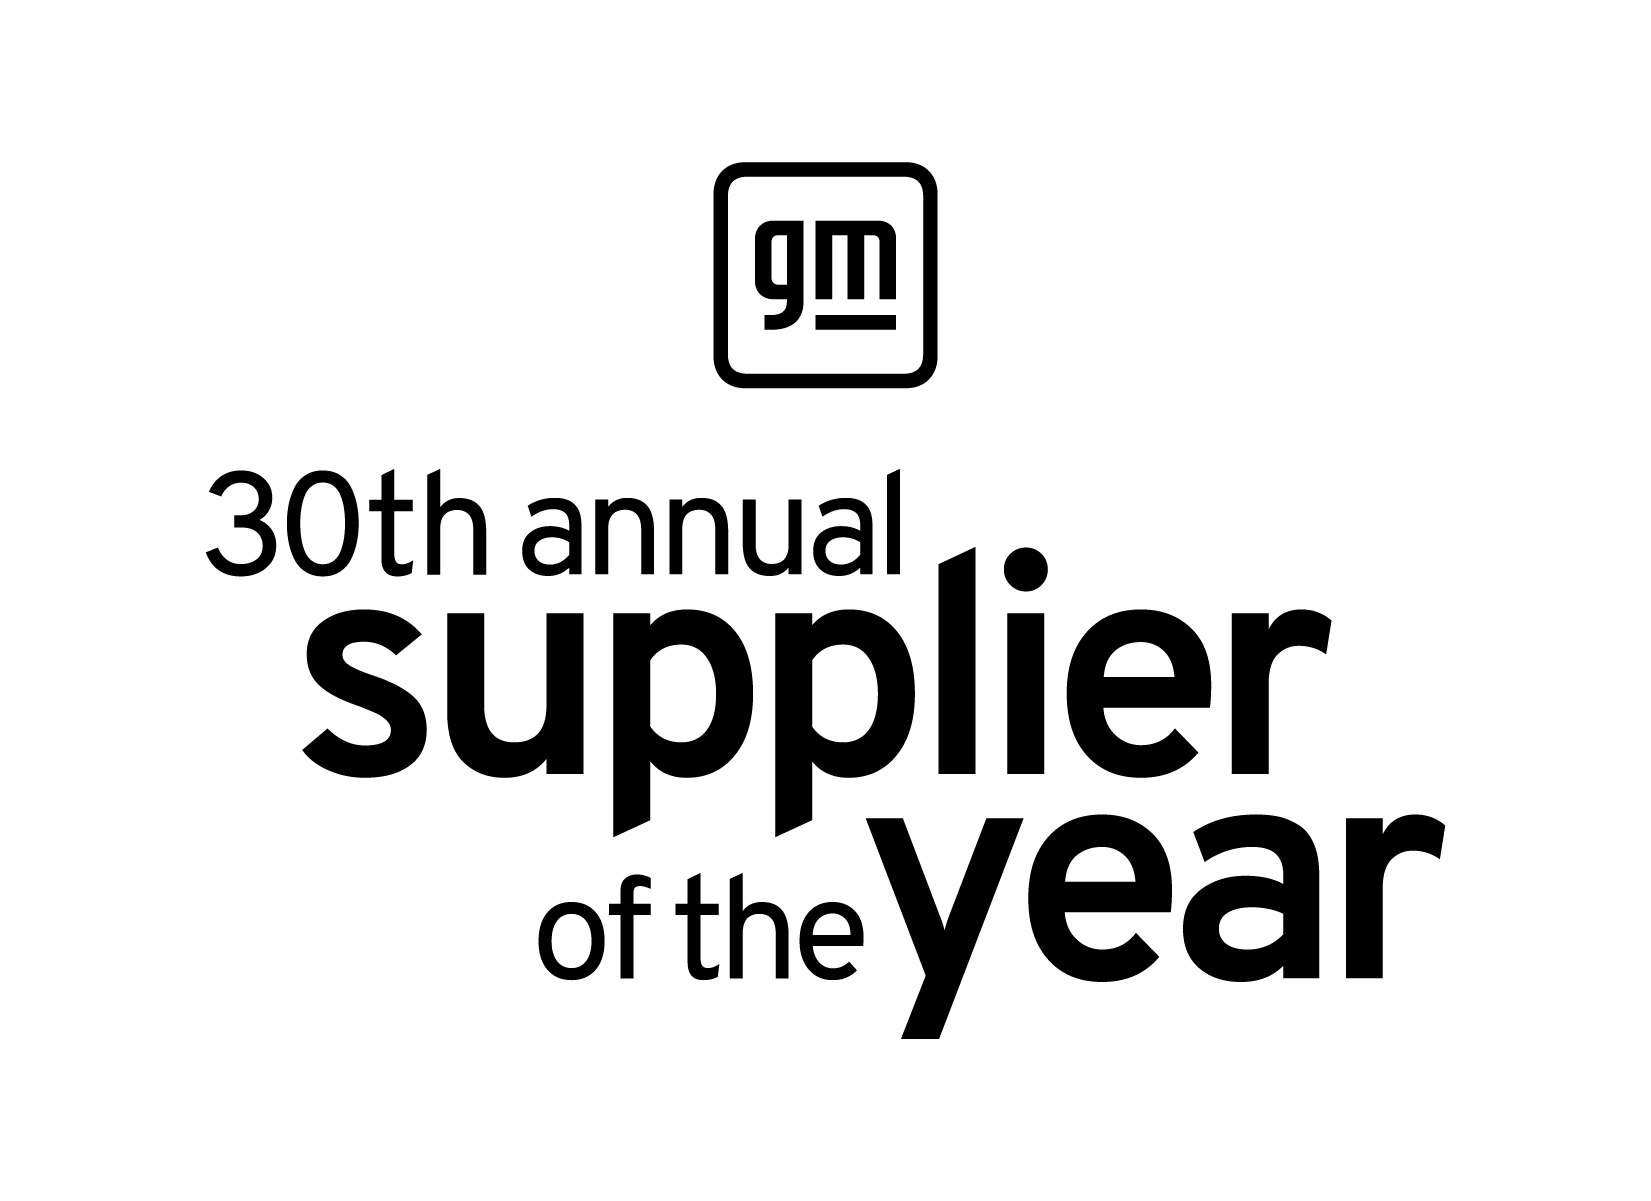 GM supplier of the year